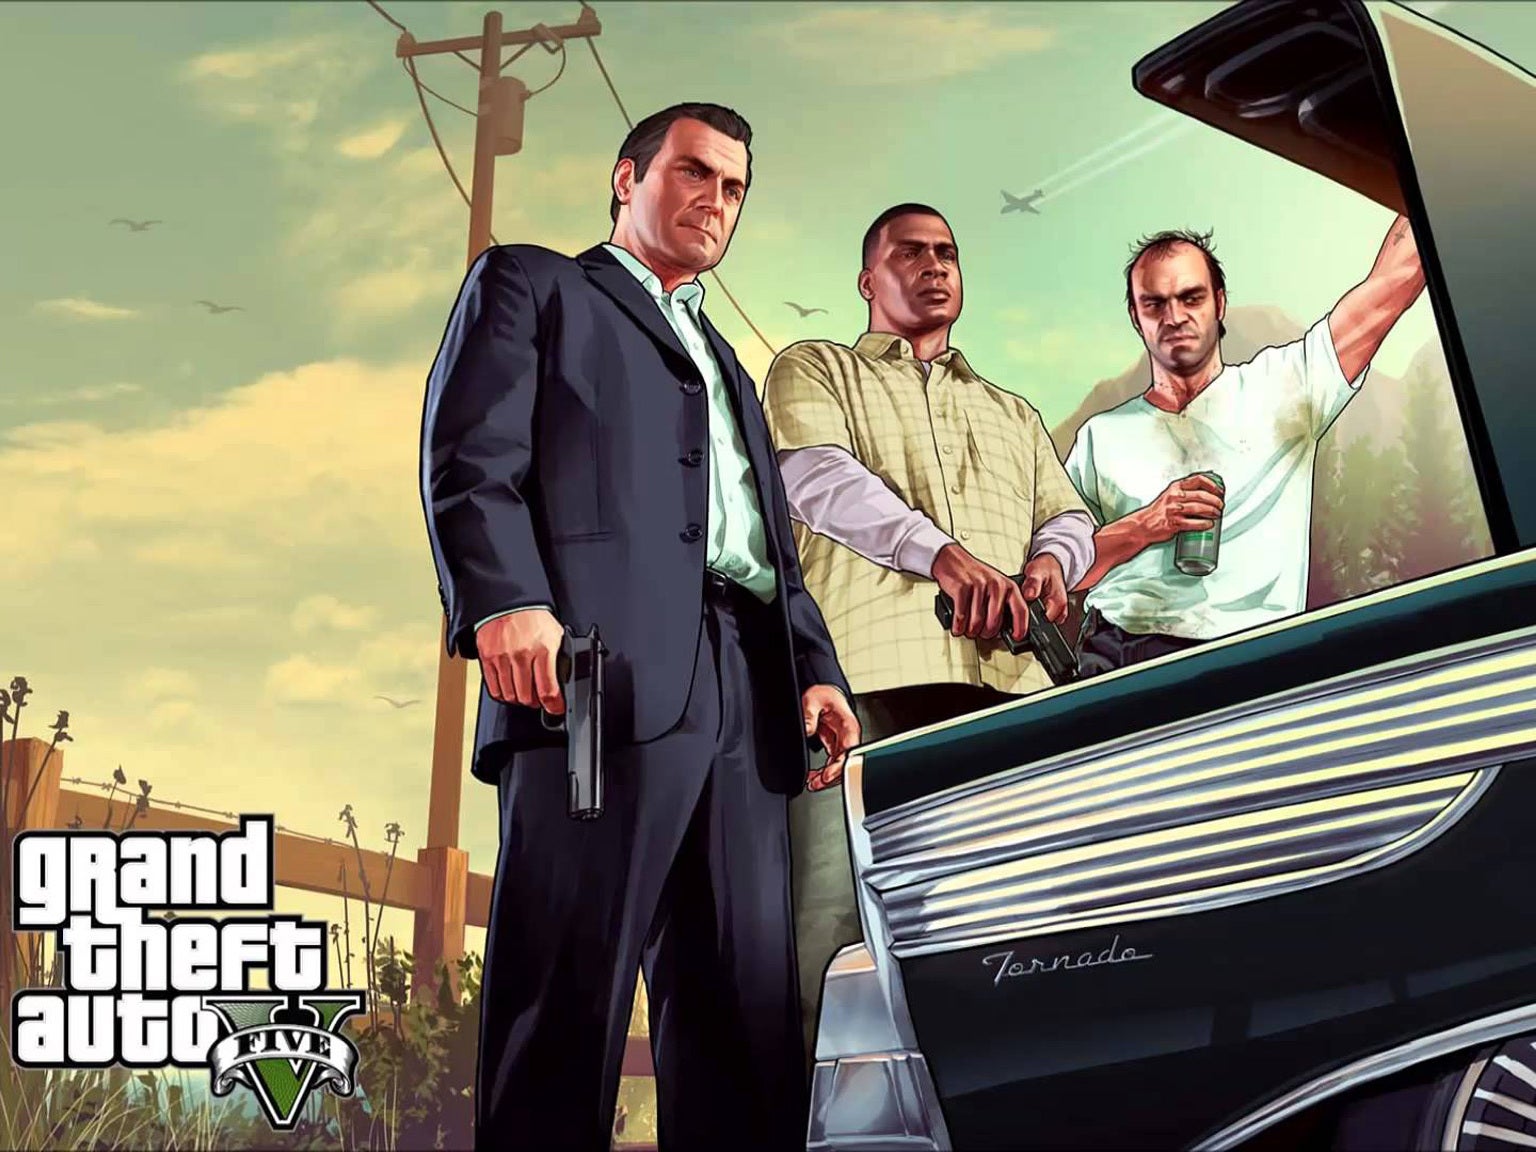 New album Welcome to Los Santos is inspired by the 2013 video game Grand Theft Auto V